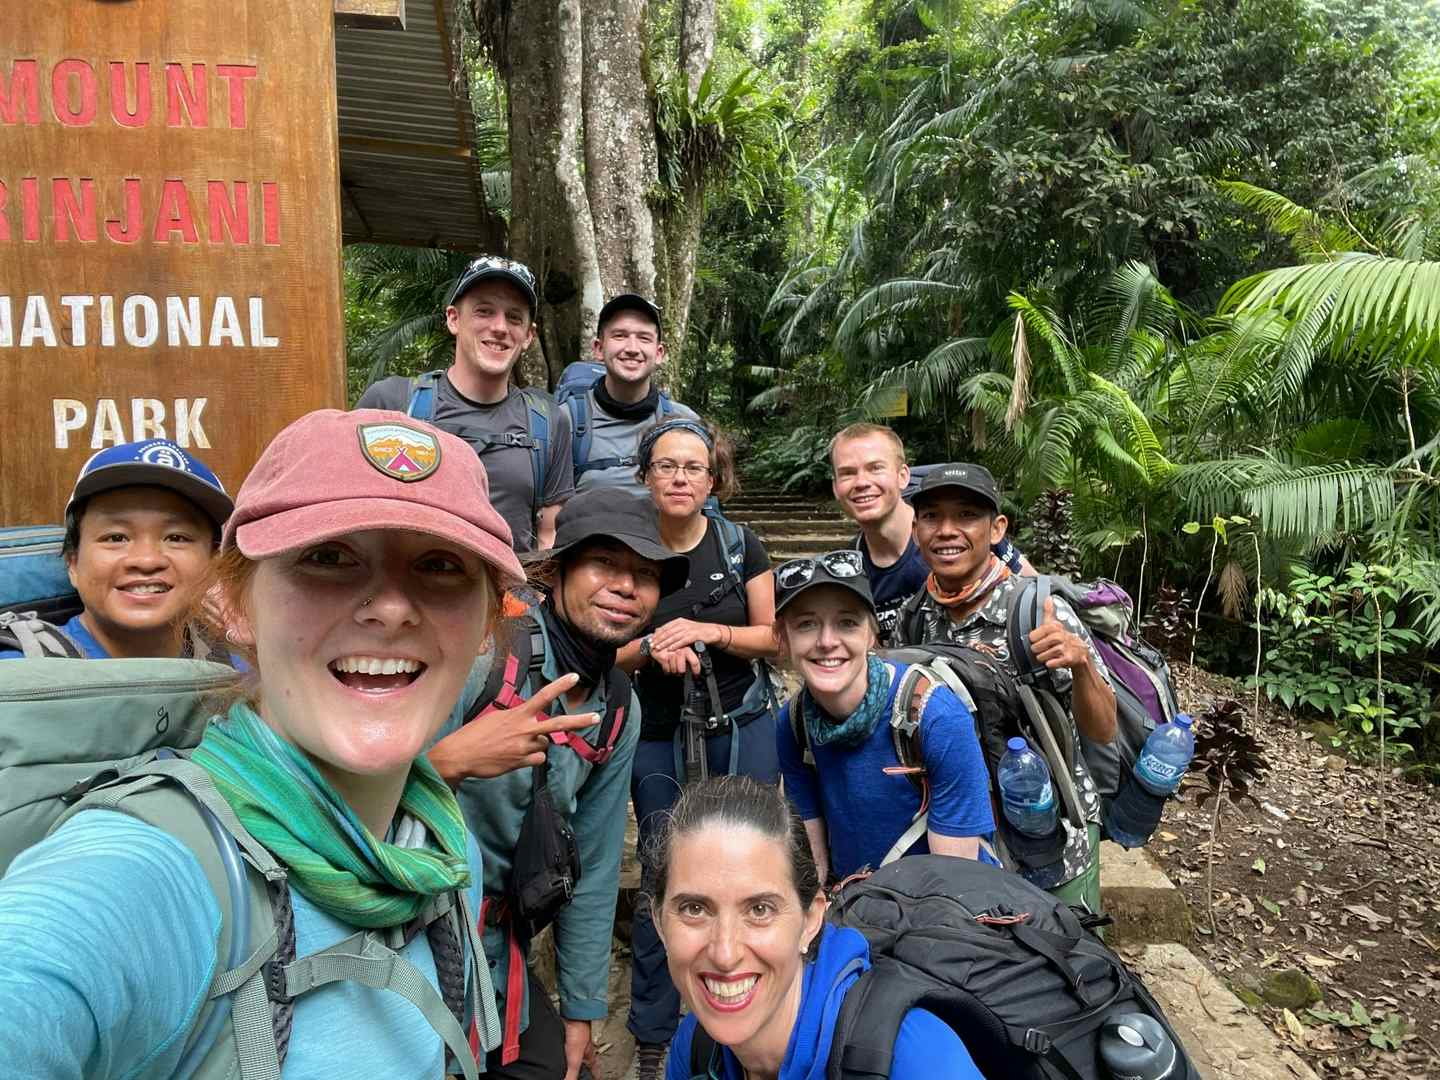 What an amazing adventure! Our guide was re...